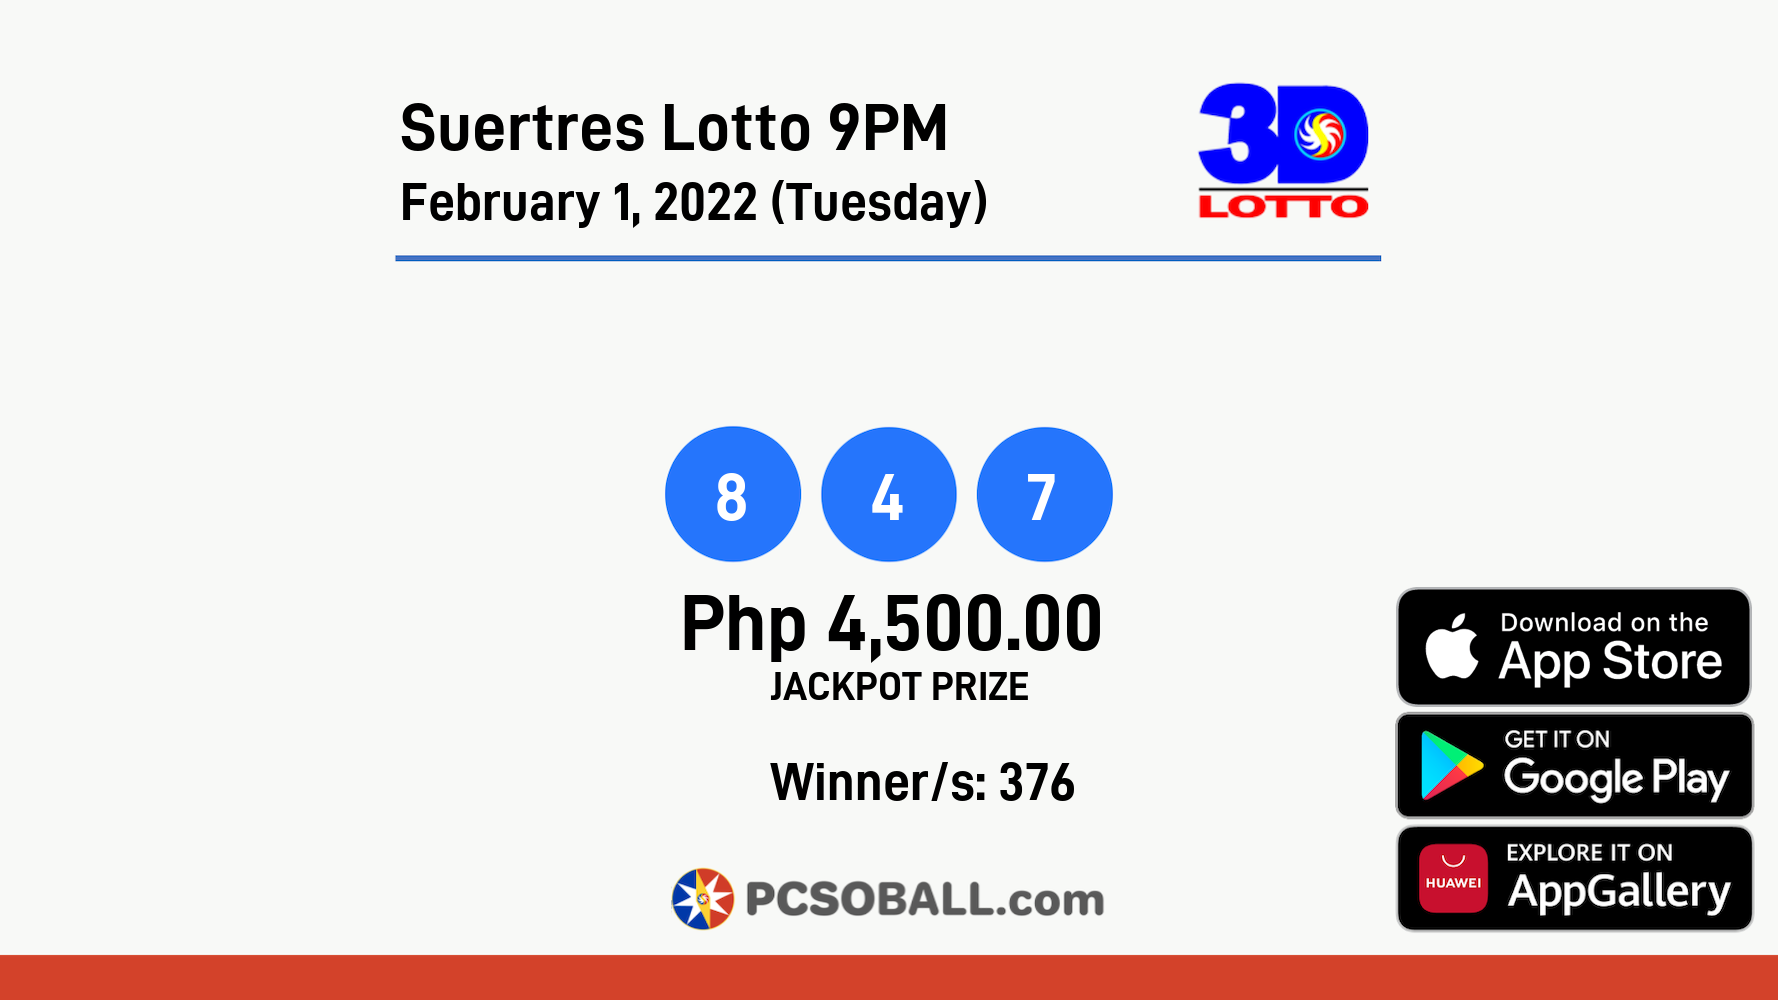 Suertres Lotto 9PM February 1, 2022 (Tuesday) Result